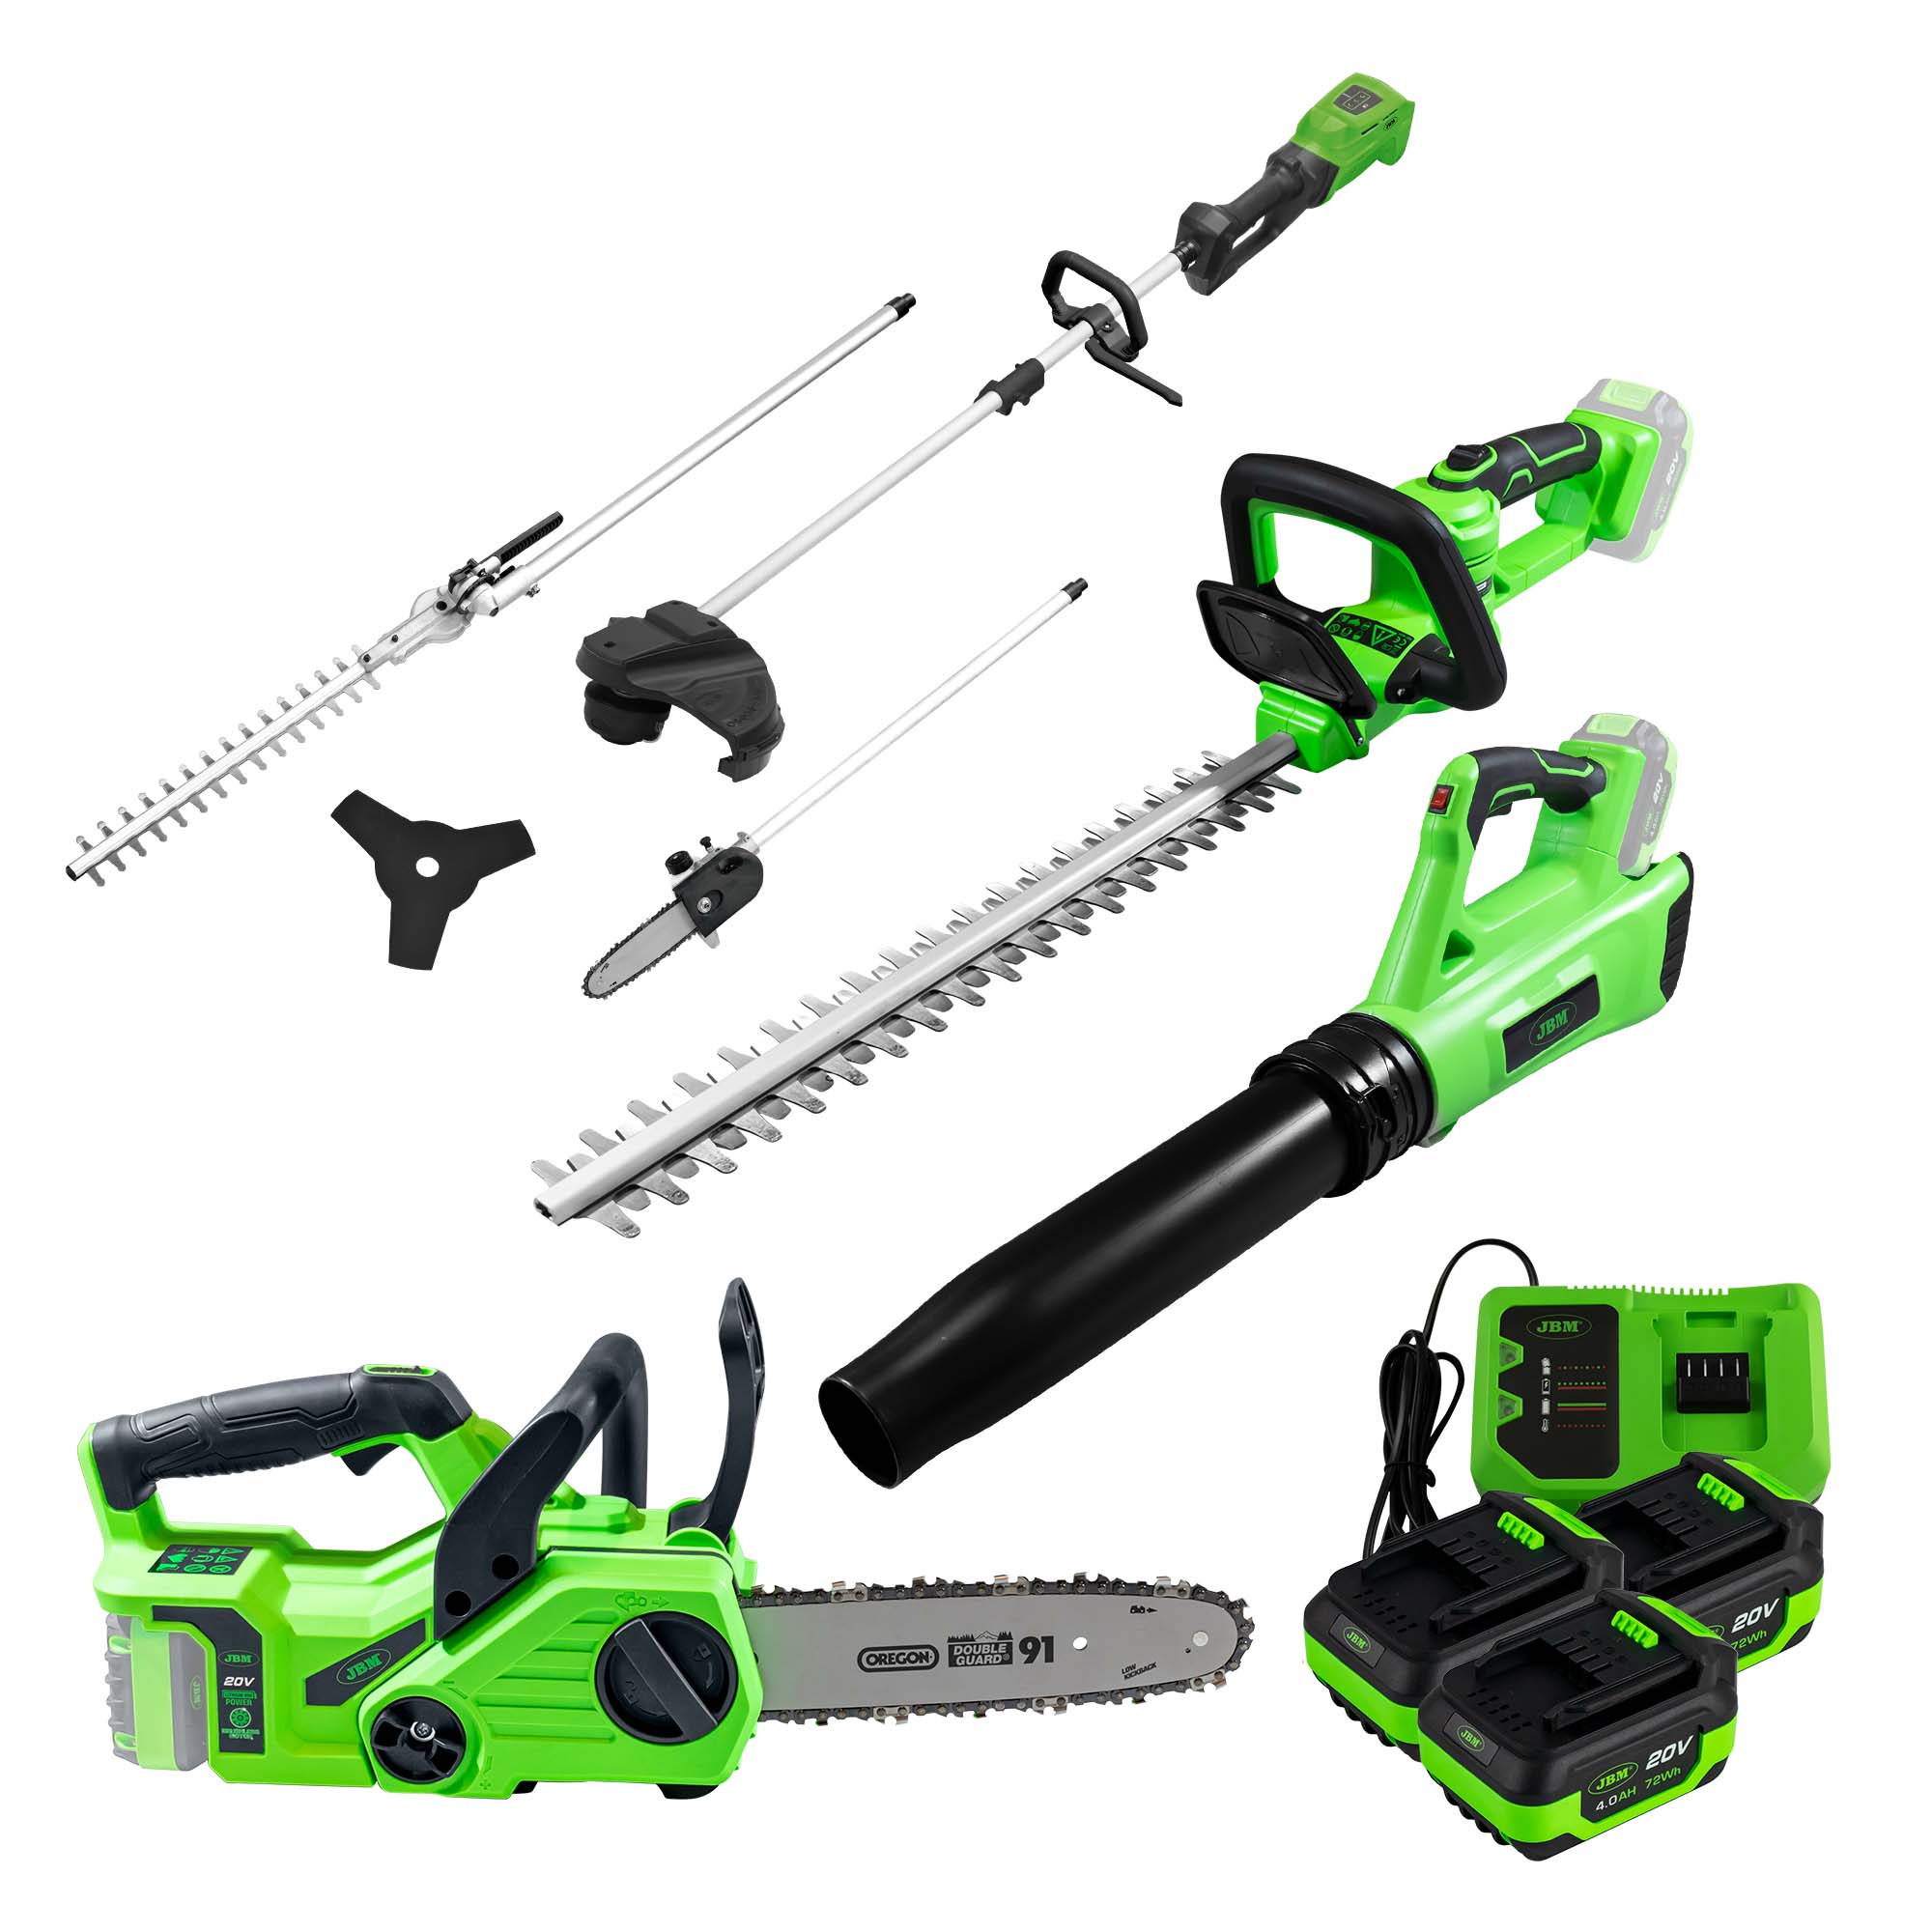 CHAINSAW +  BLOWER + HEDGE TRIMMER + MULTI FUNCTION TOOL + 60013 (X3) + 60017